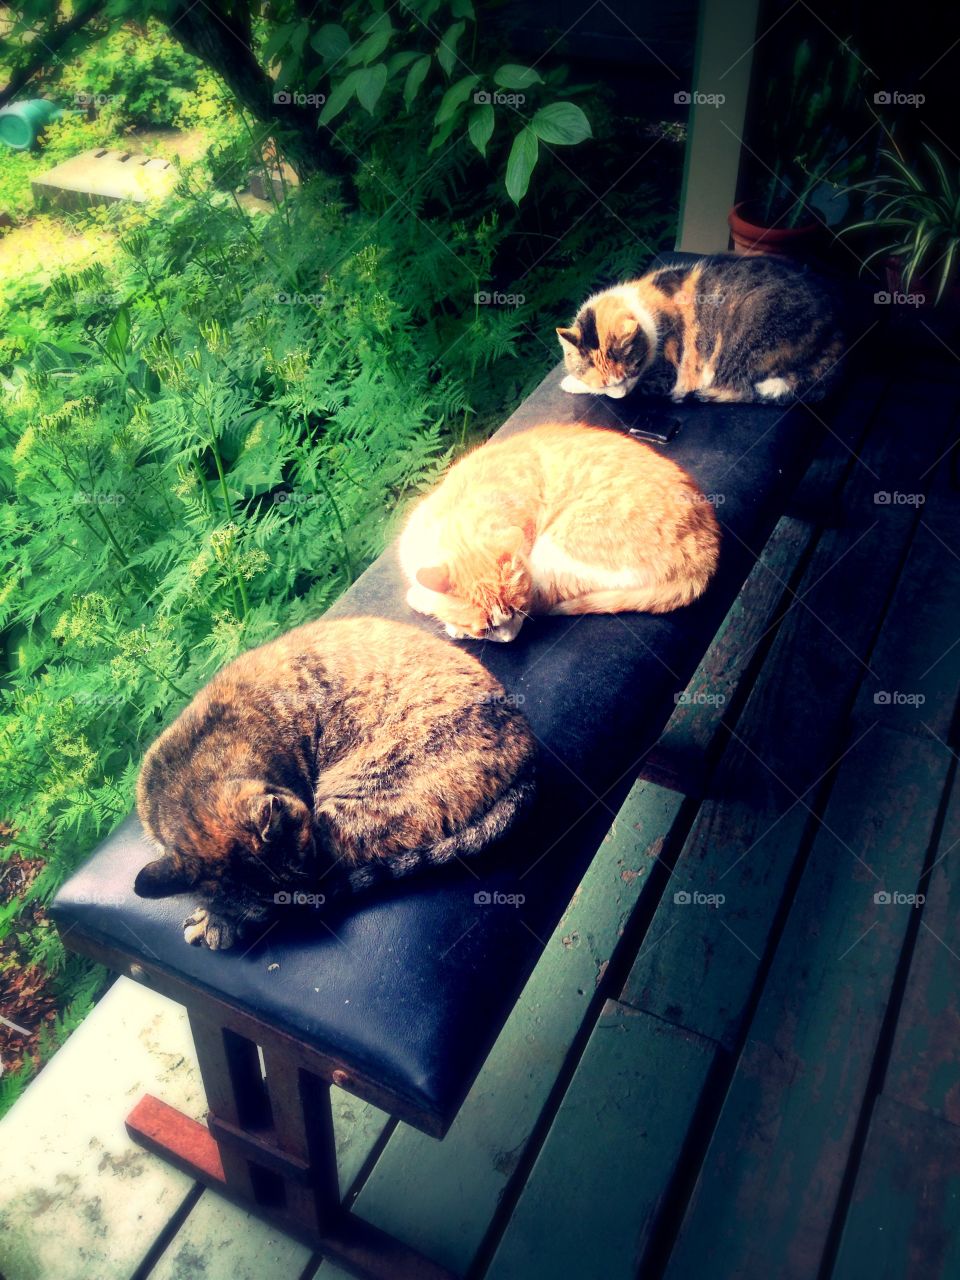 Cats sleeping on bench in the garden